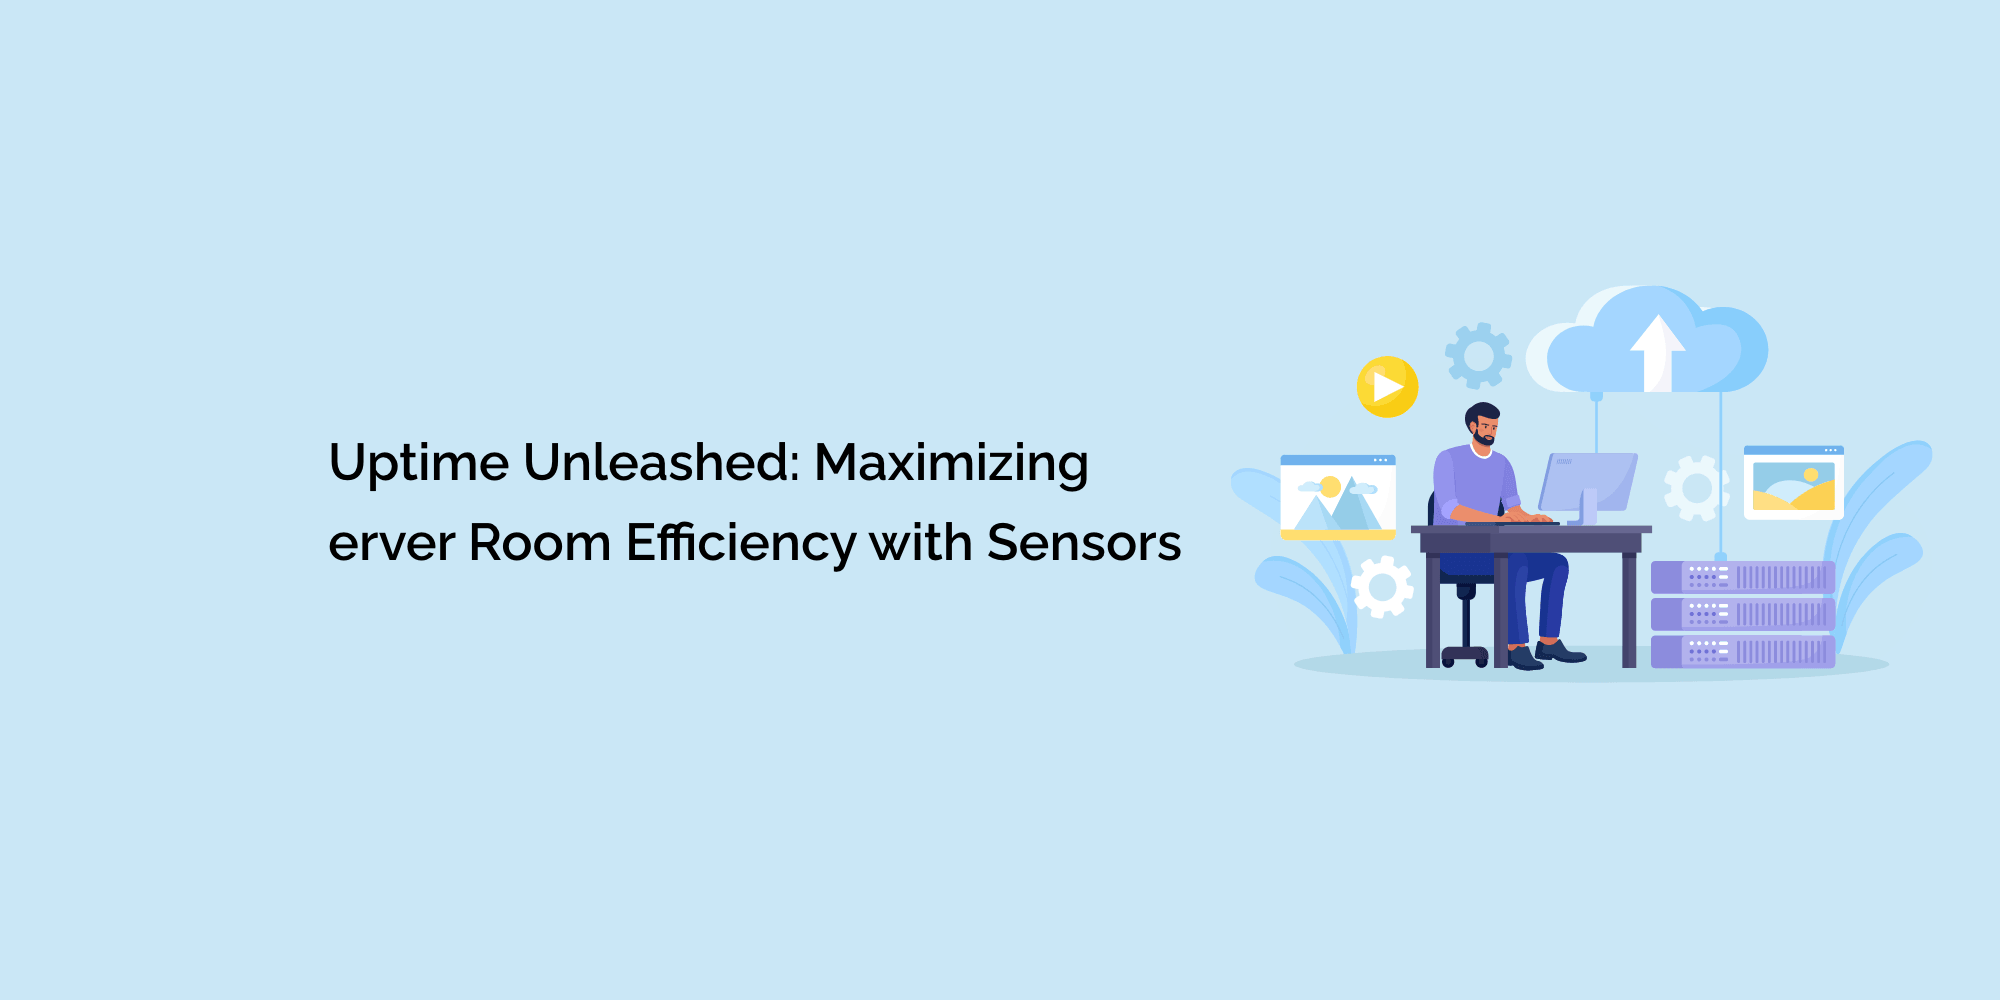 Uptime Unleashed: Maximizing Server Room Efficiency with Sensors